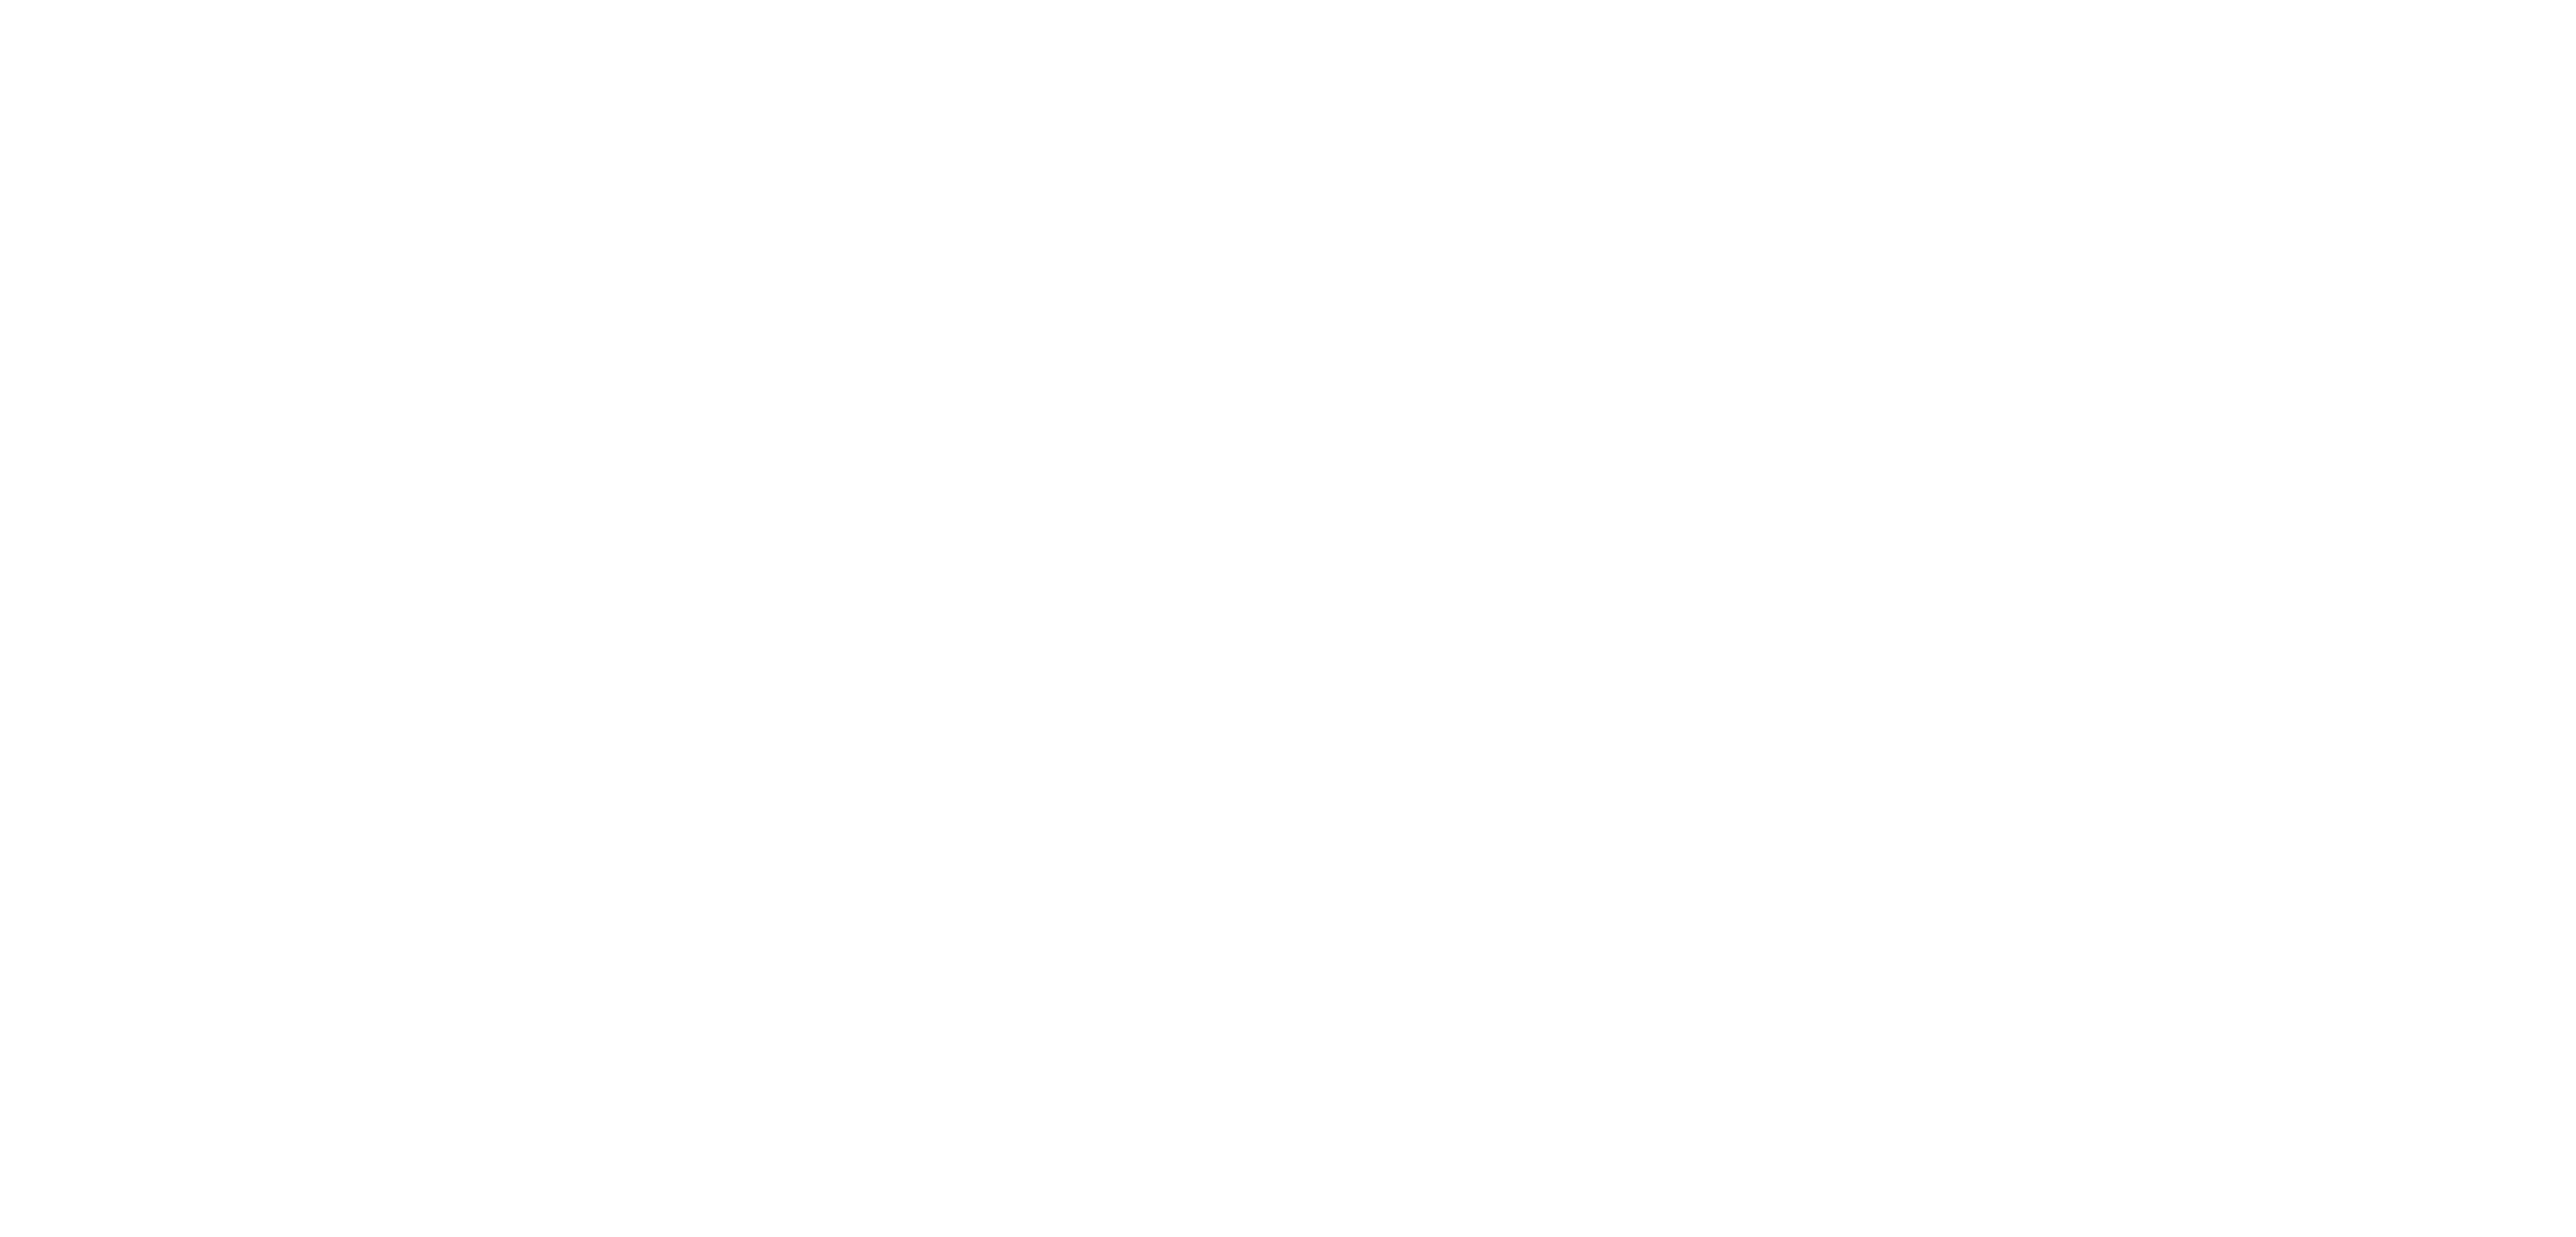 Just in Time for Christmas logo